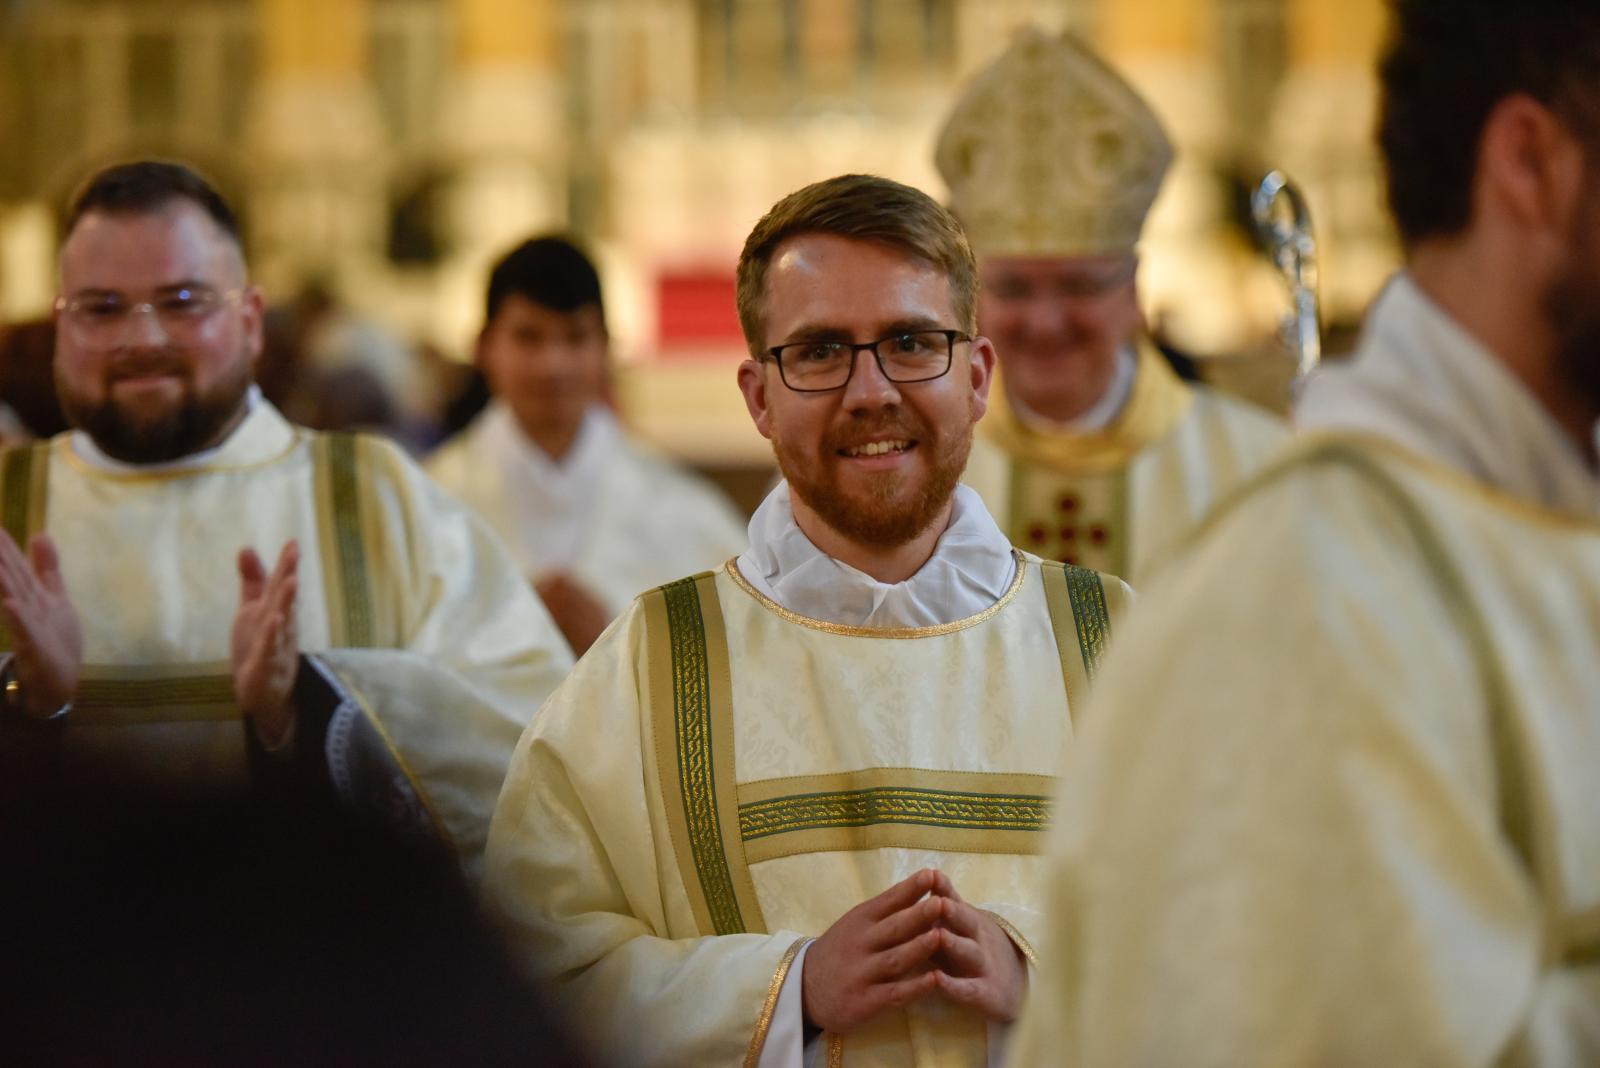 The Lord has done great things for me - Diocese of Westminster